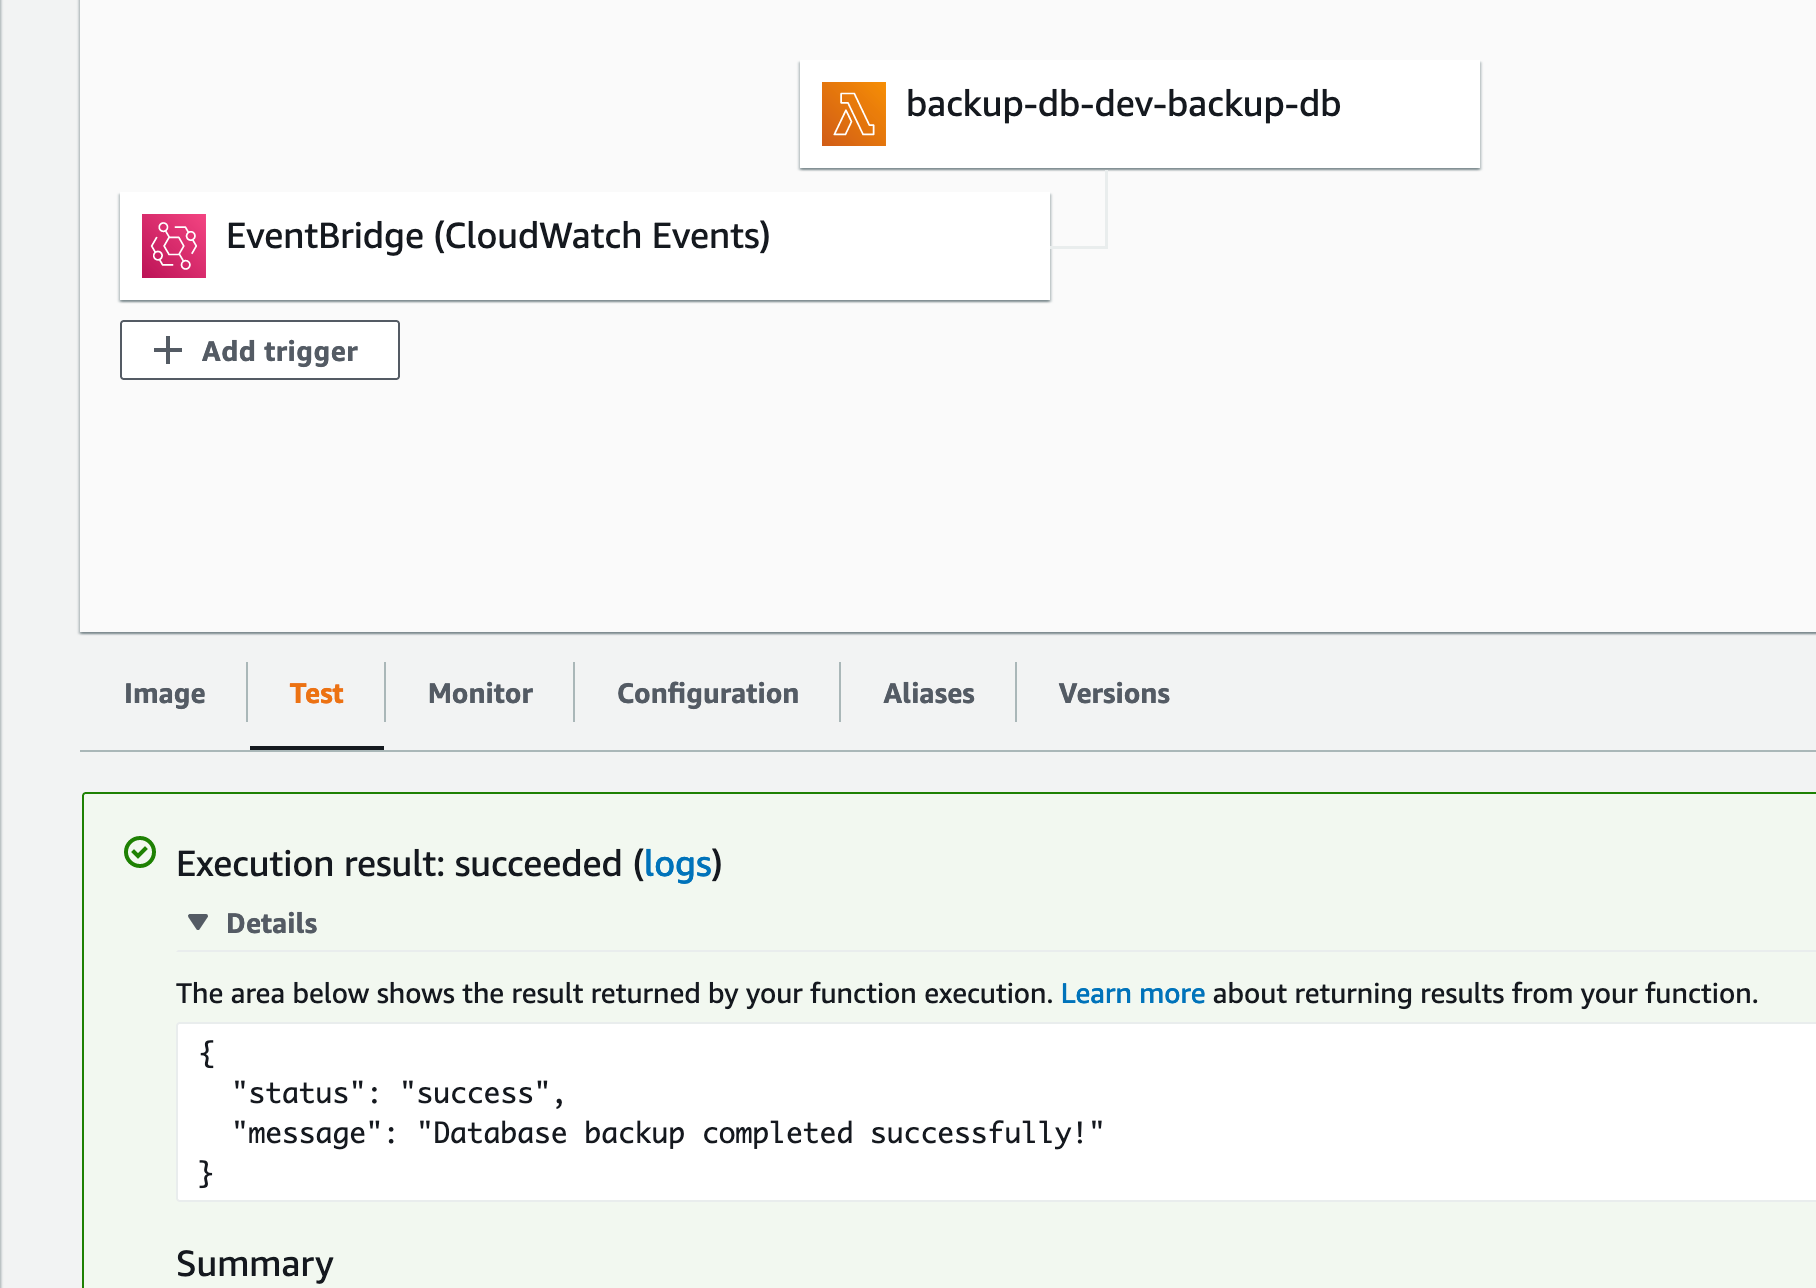 Trigger the Lambda function from the AWS console.